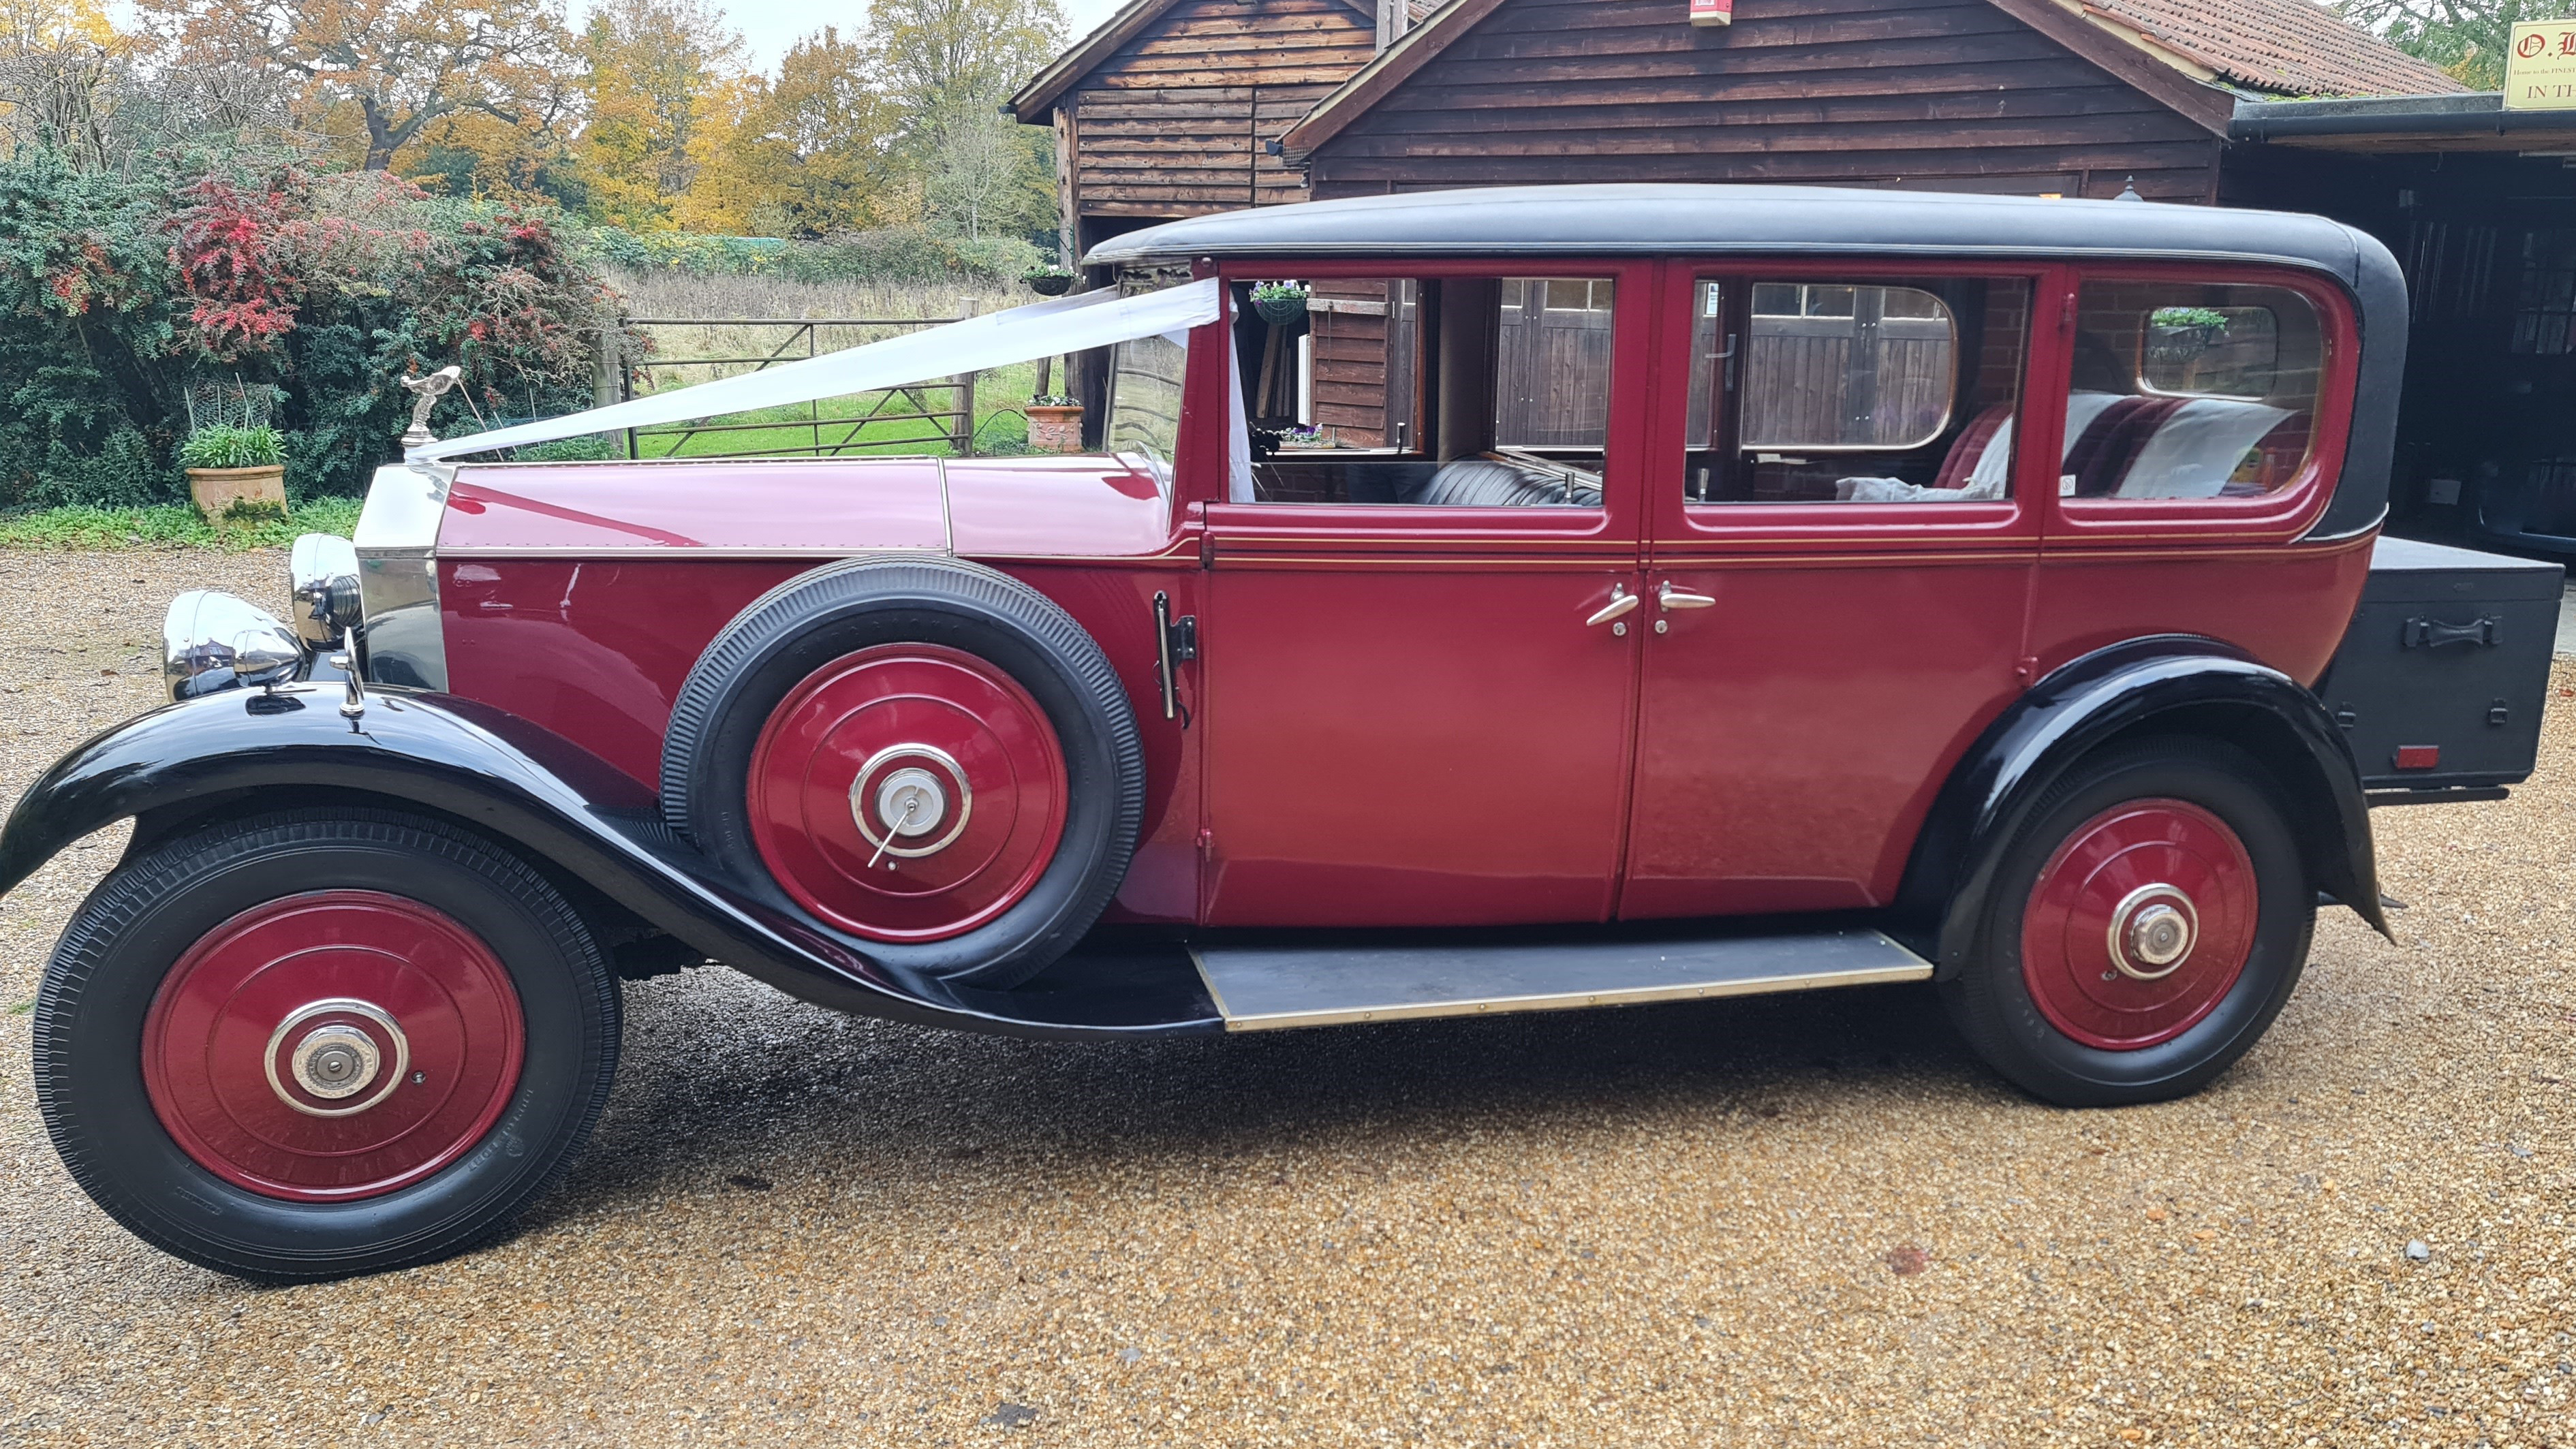 Rolls Royce 20/25 Limousine wedding car for hire in Hook, Hampshire